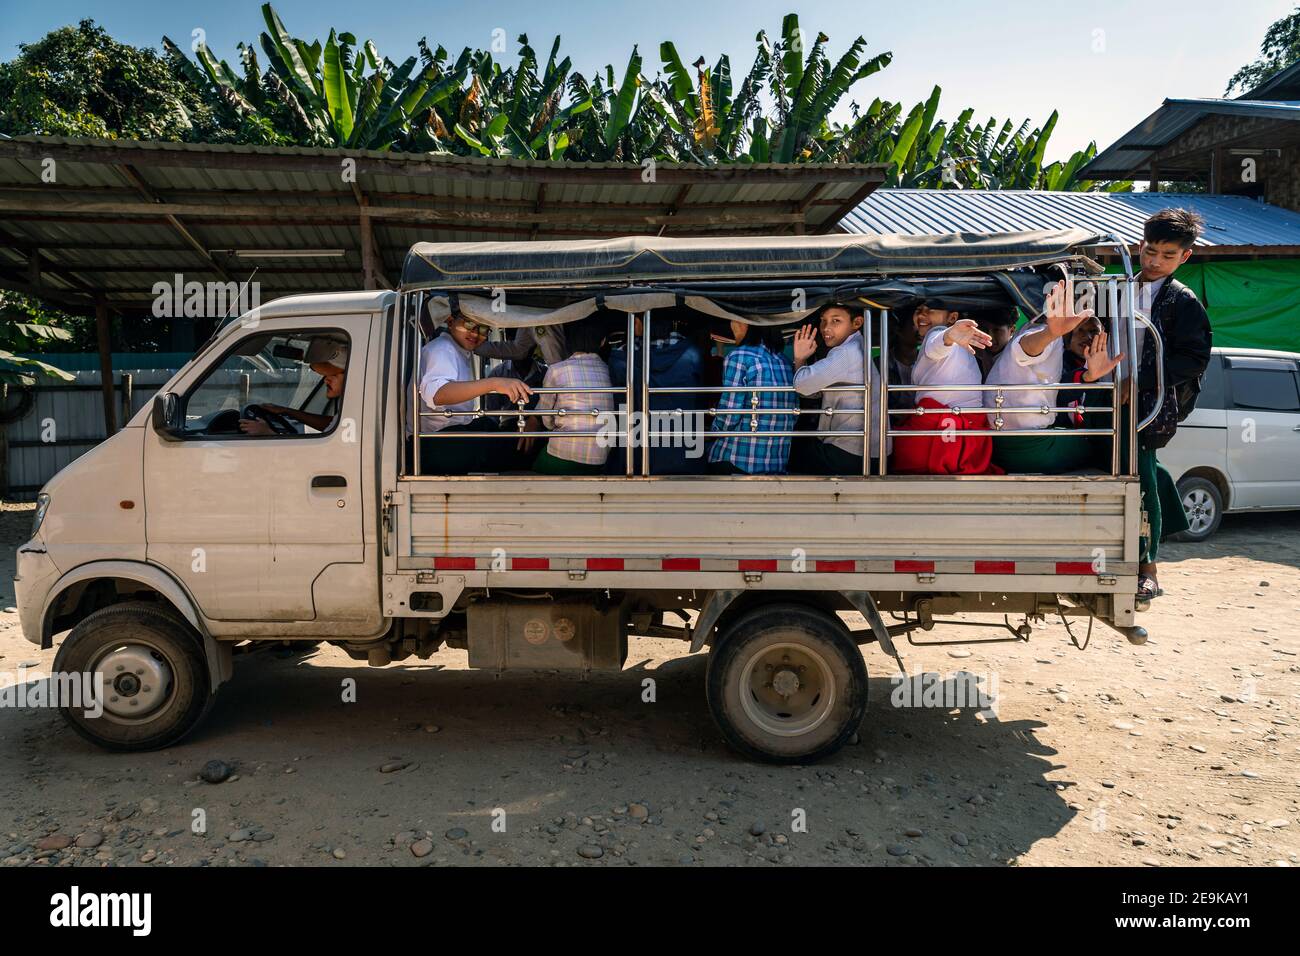 The students, most of whom are orphans who fled the civil war, are driven to the state school again for lessons in Myikyina, Myanmar. Stock Photo